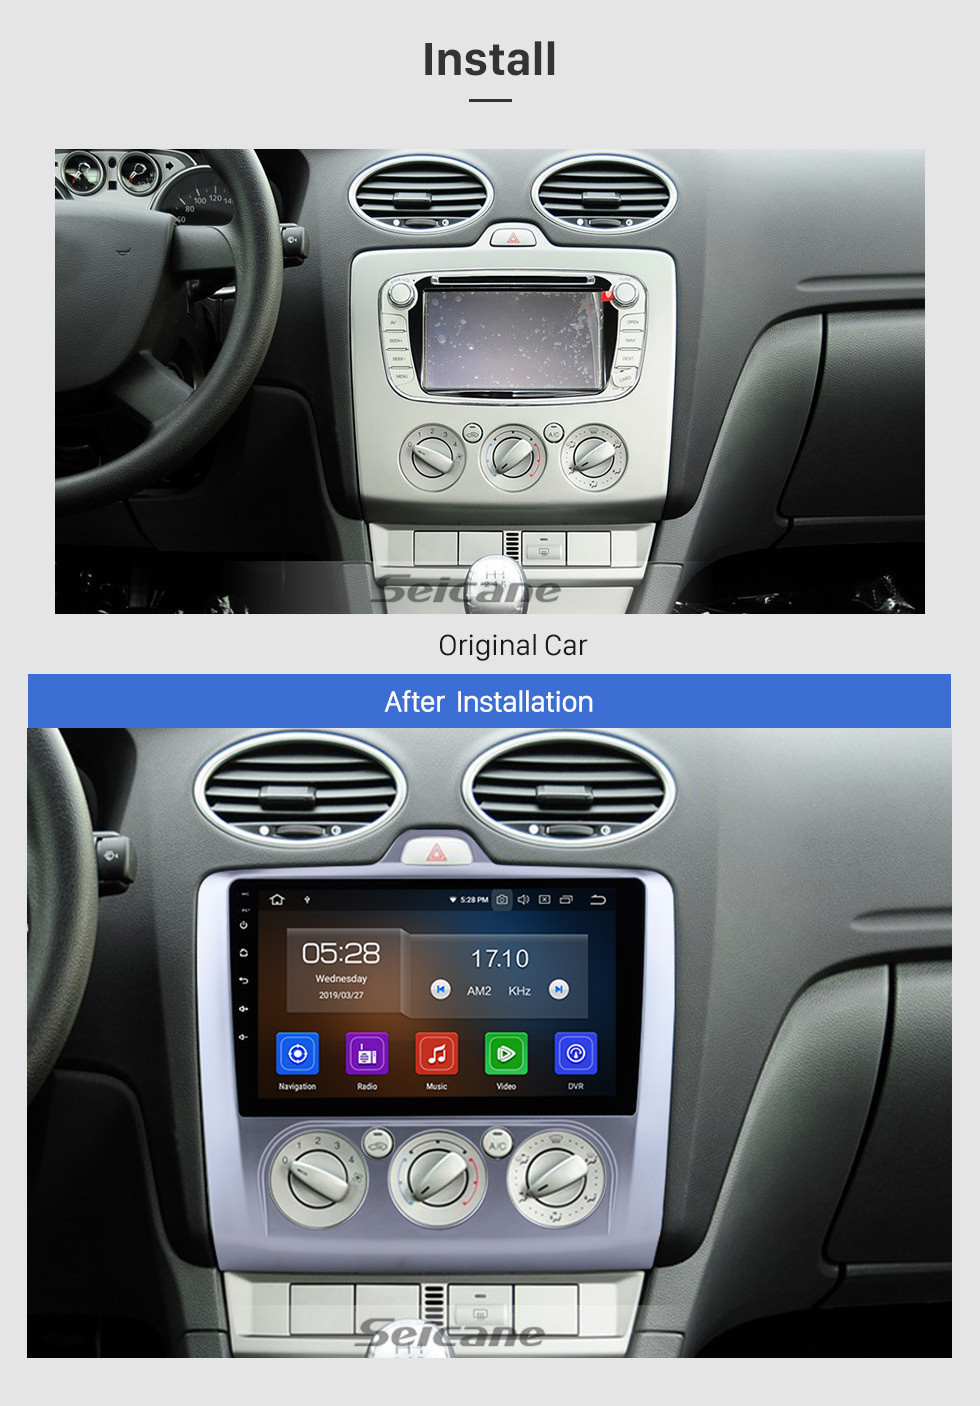 Seicane 9 Inch OEM Android 10.0 Radio 2004-2011 Ford FOCUS EXI MT 2 3 Mk2/Mk3 Manual air condition GPS Navigation system Bluetooth Touch Screen TPMS DVR OBD II Rear camera AUX 3G WiFi HD 1080P Video 